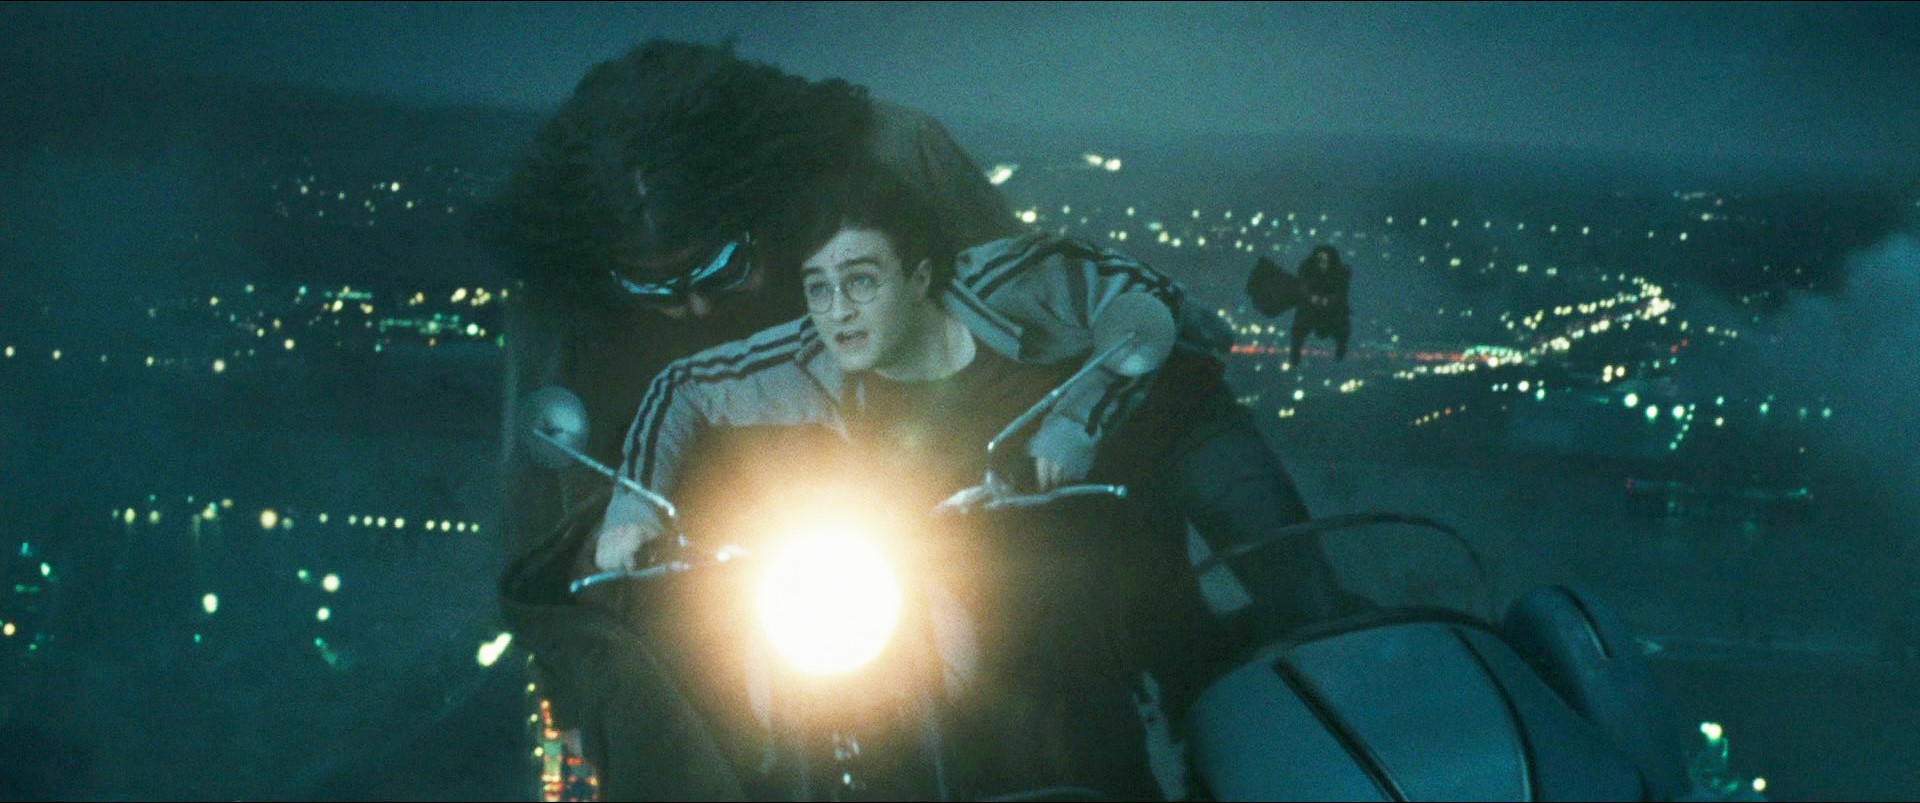 The Cinematic Magic of the Battle of the Seven Potters in the Harry Potter Movies 2